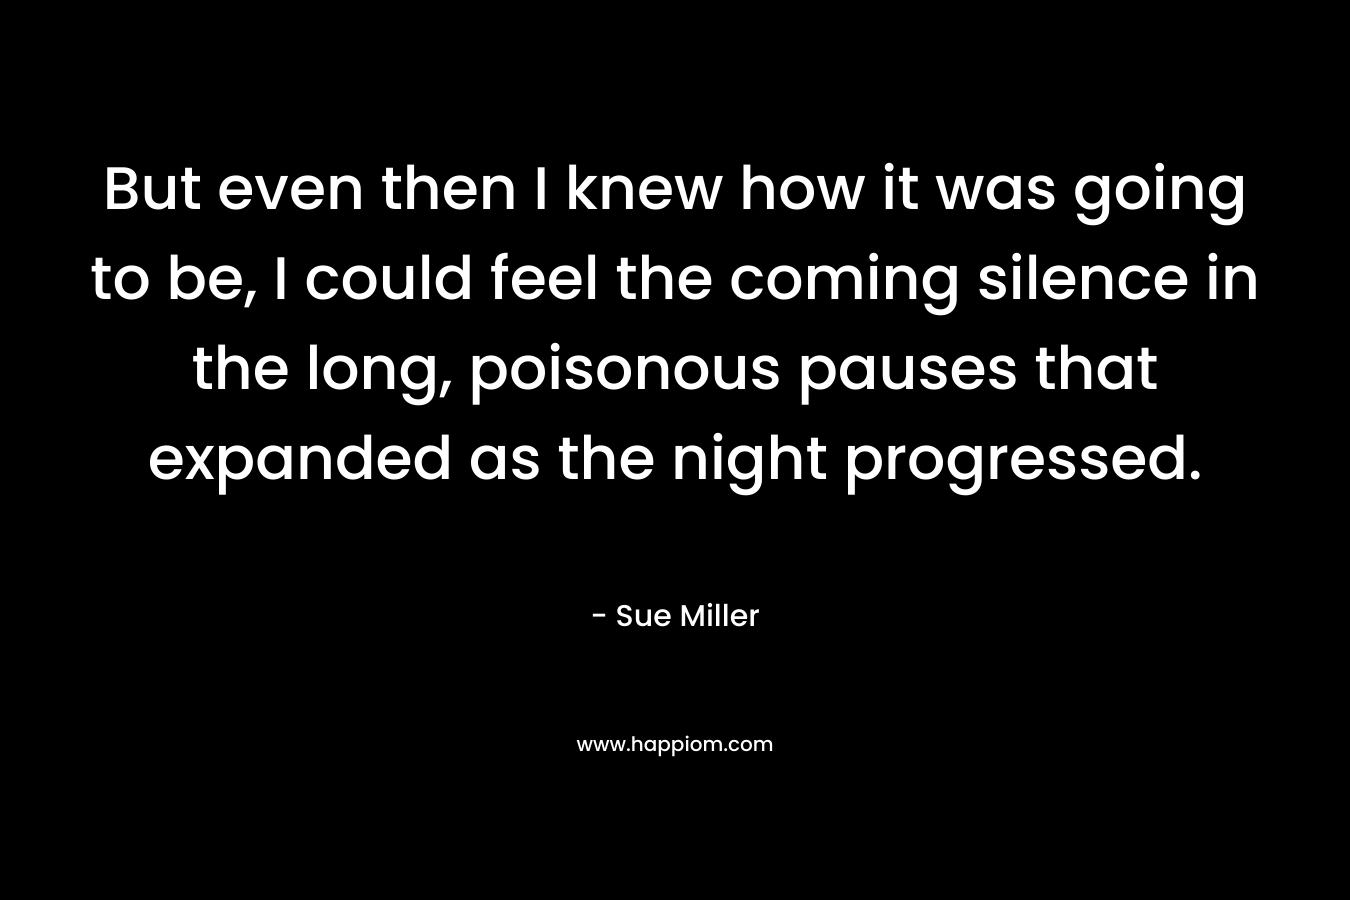 But even then I knew how it was going to be, I could feel the coming silence in the long, poisonous pauses that expanded as the night progressed. – Sue Miller